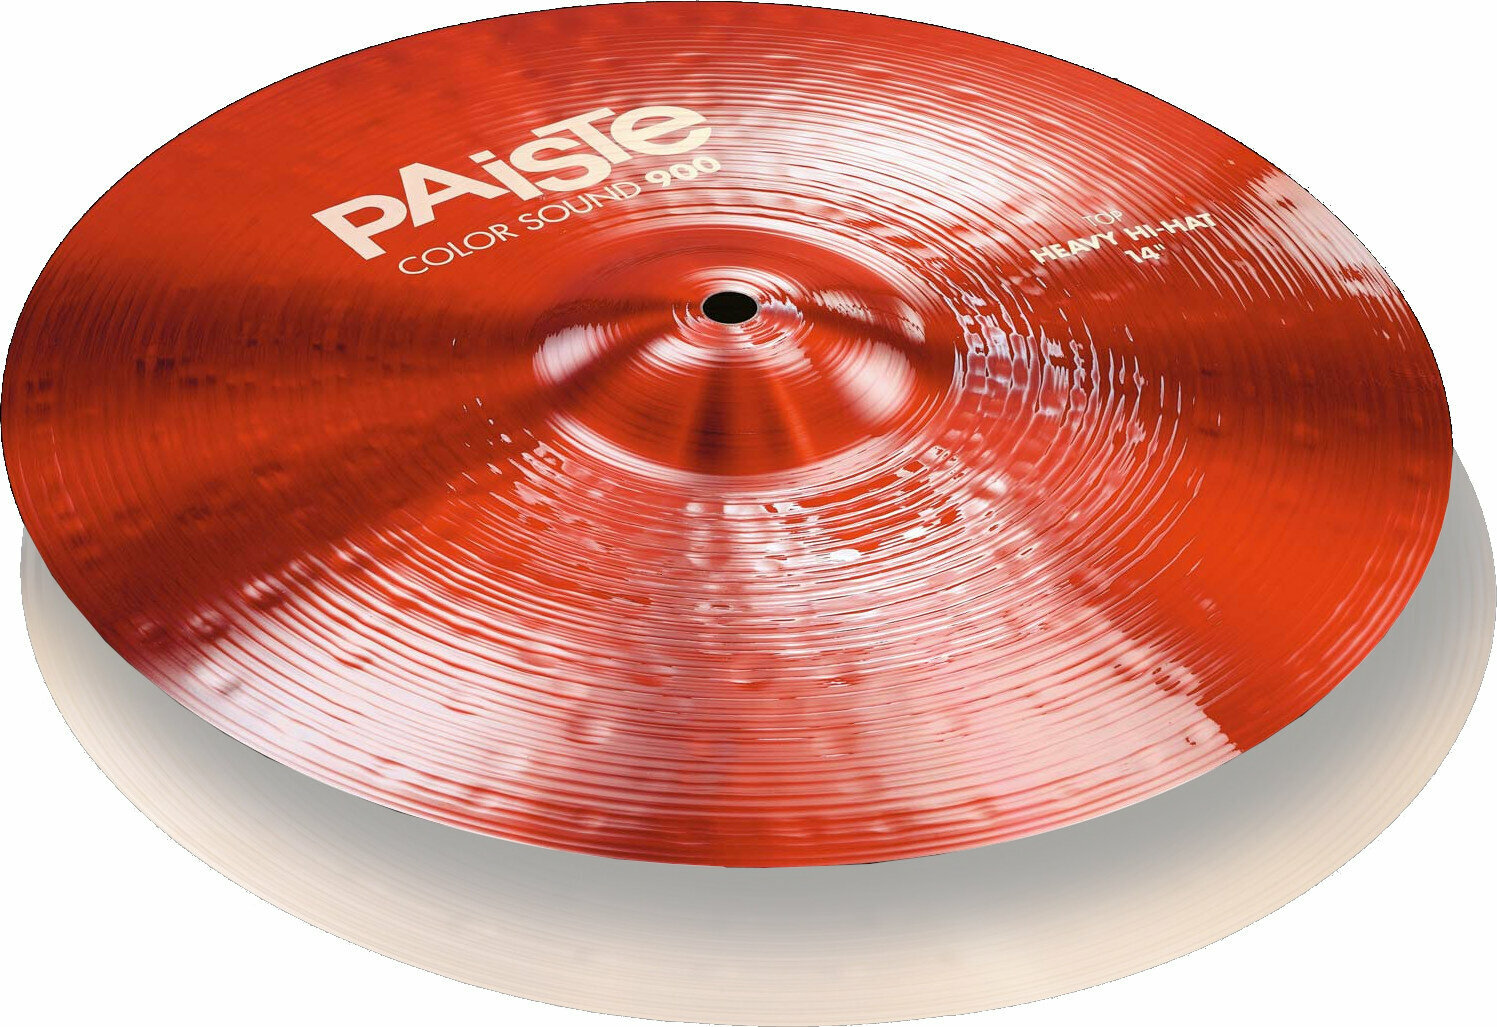 Cymbale charleston Paiste Color Sound 900  Heavy Top Cymbale charleston 15" Rouge